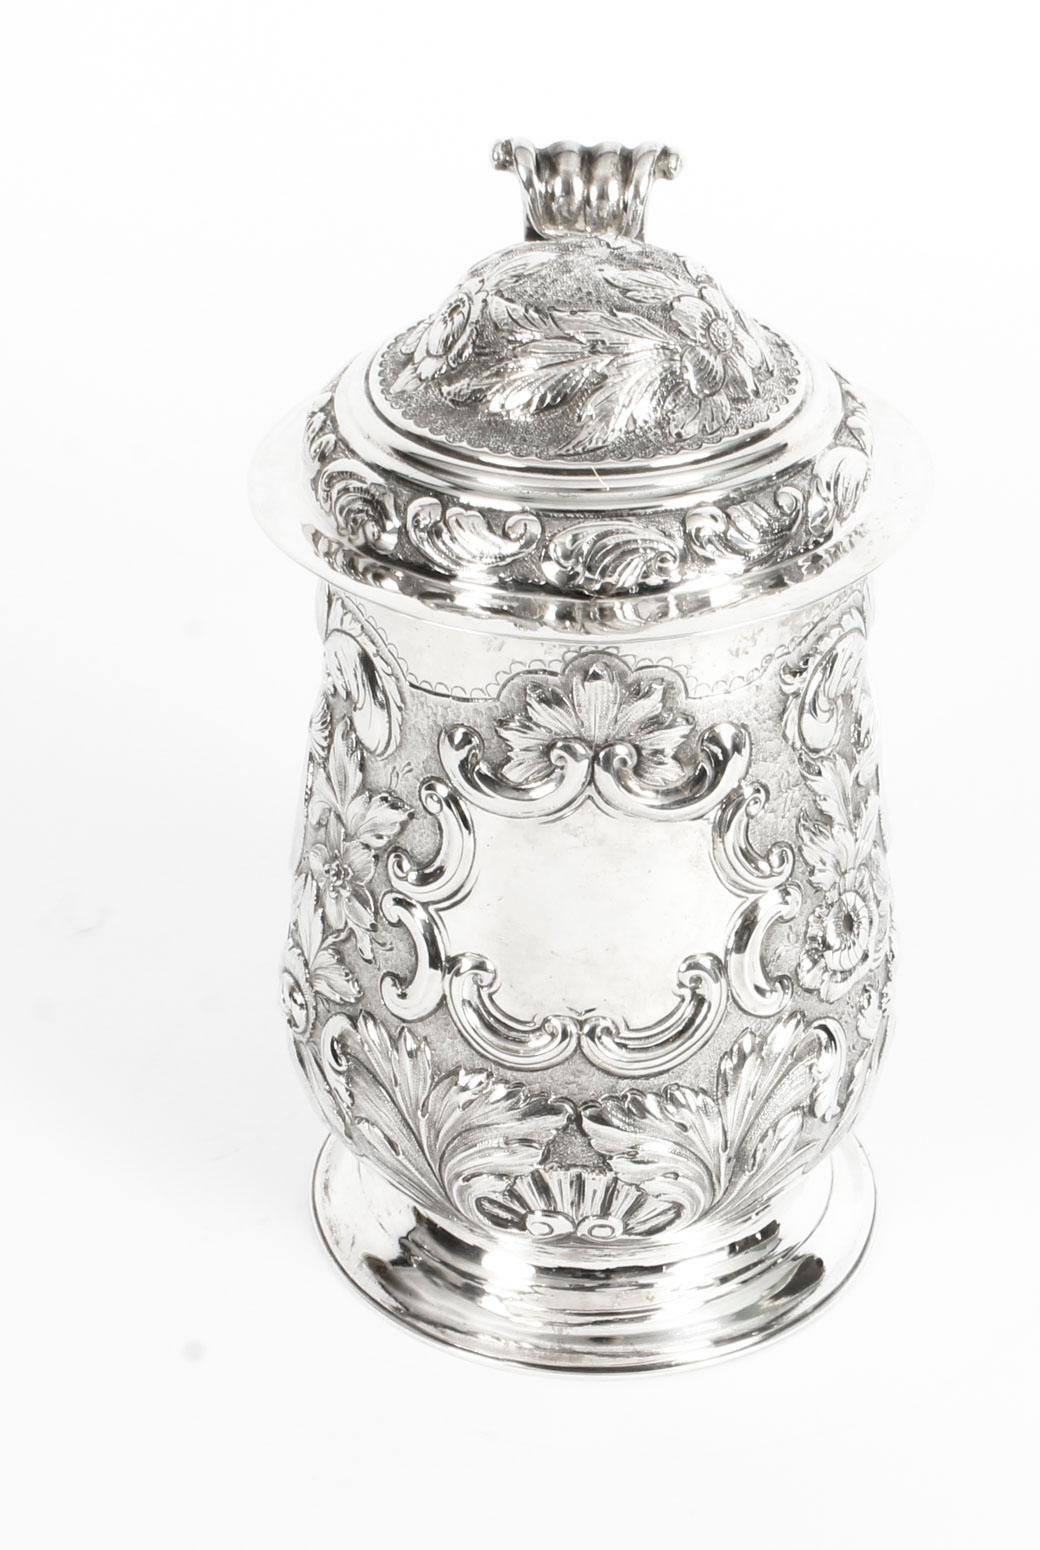 This is a truly wonderful antique English George III sterling silver lidded tankard with hallmarks for London 1774 and the maker's mark of the renowned silversmith, John King.

This magnificent tankard features wonderful embossed floral decorations